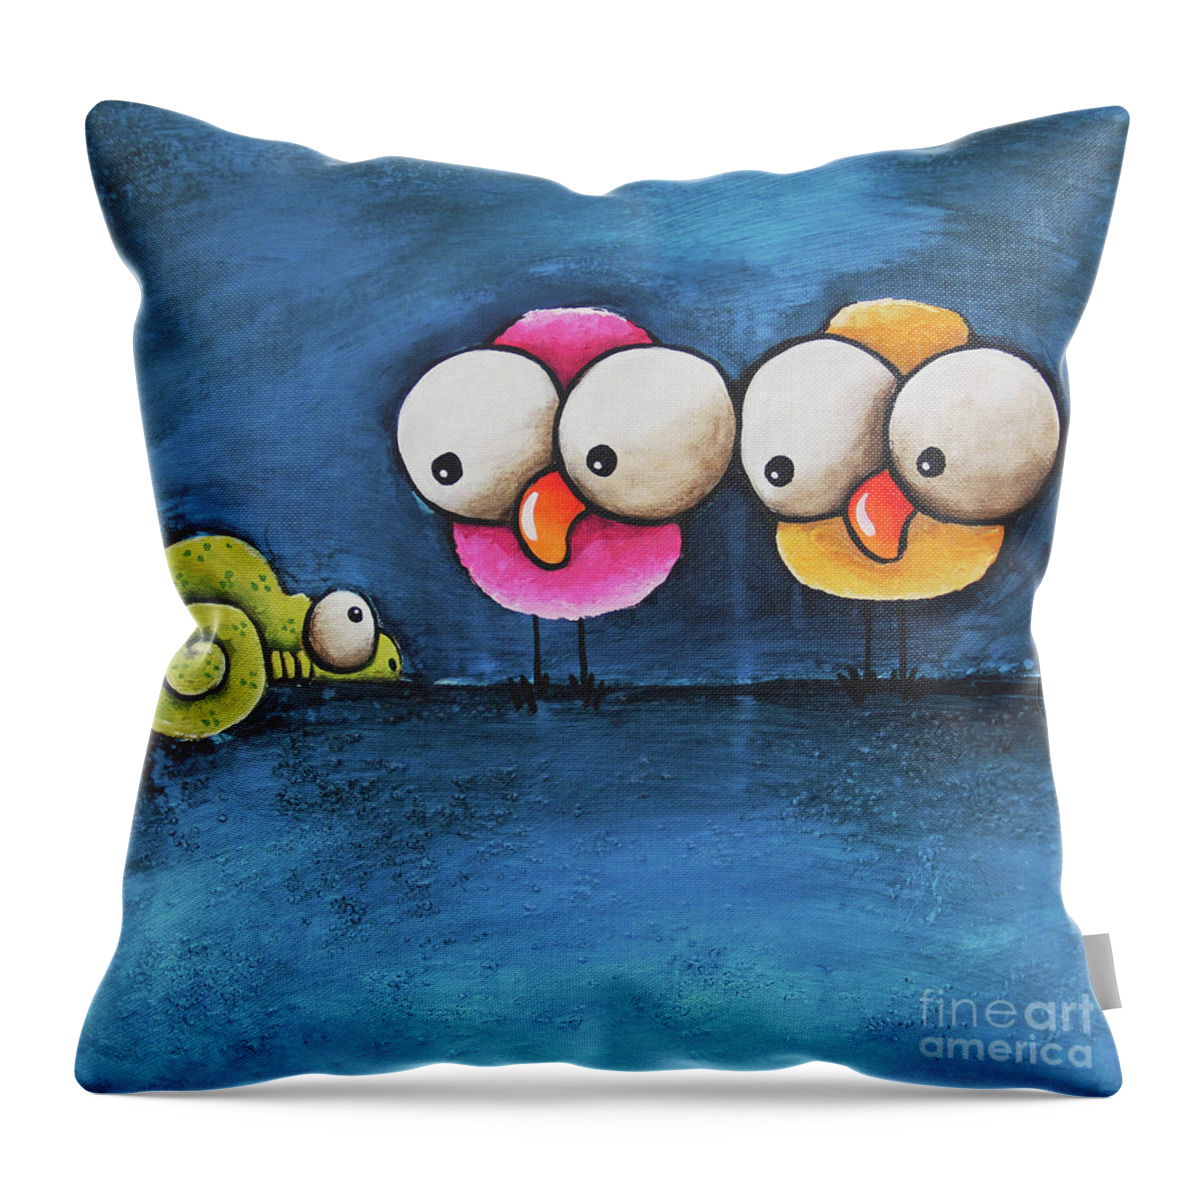 Bird Throw Pillow featuring the painting The Chameleon by Lucia Stewart